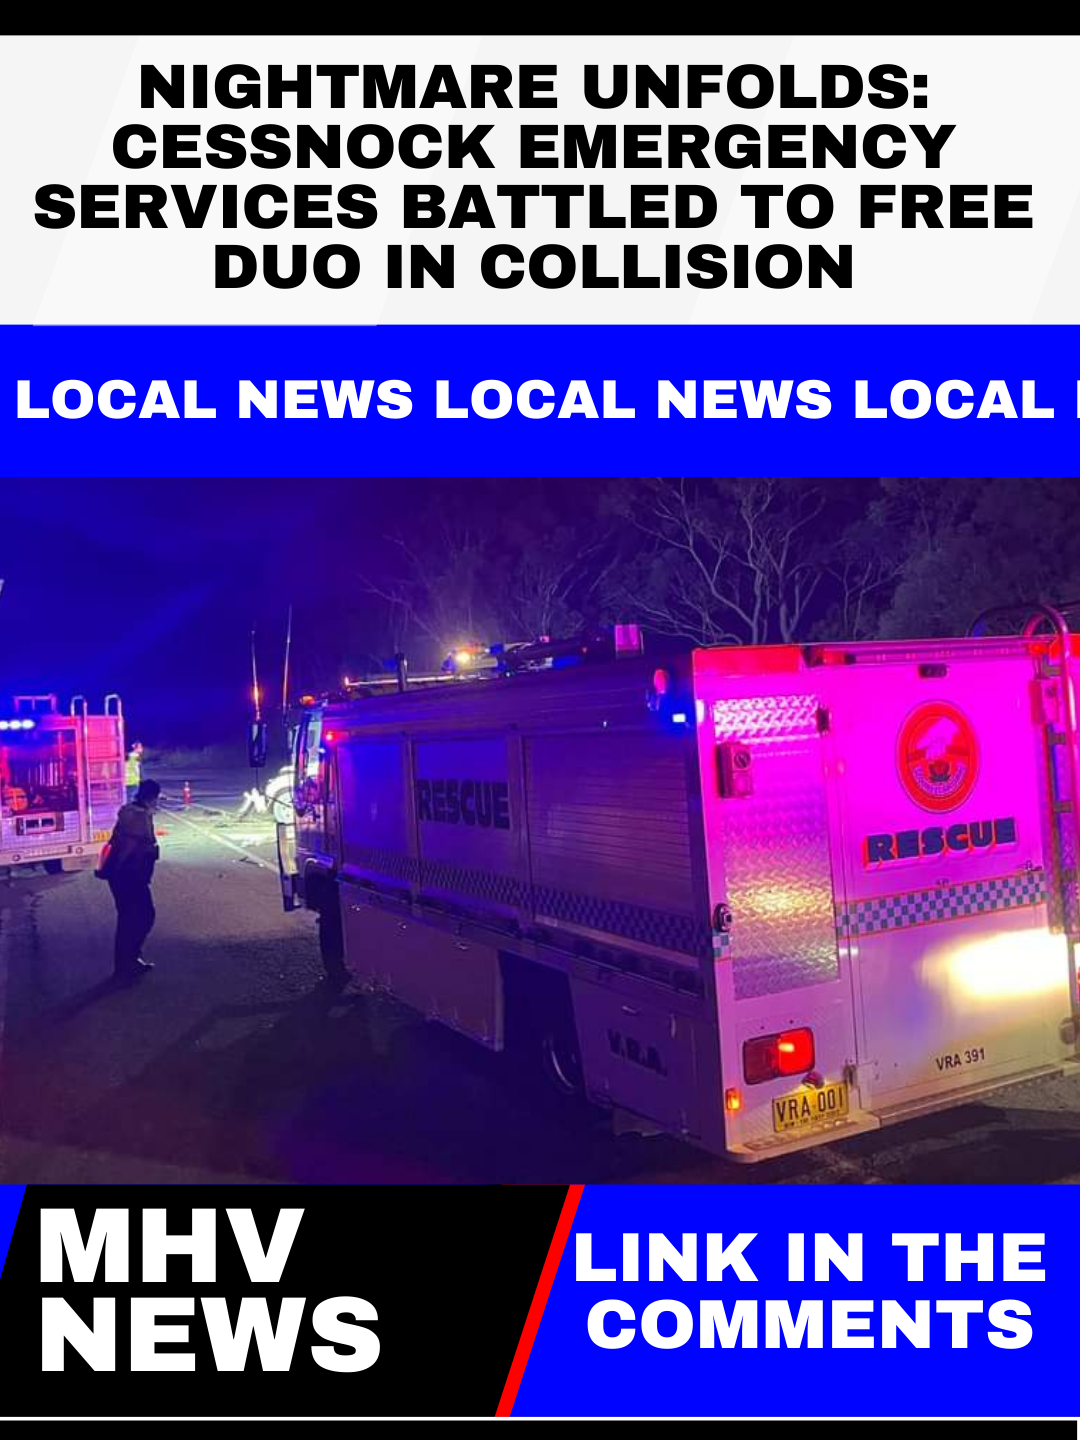 Read more about the article Nightmare Unfolds: Cessnock Emergency Services Battled to Free Duo in Collision.